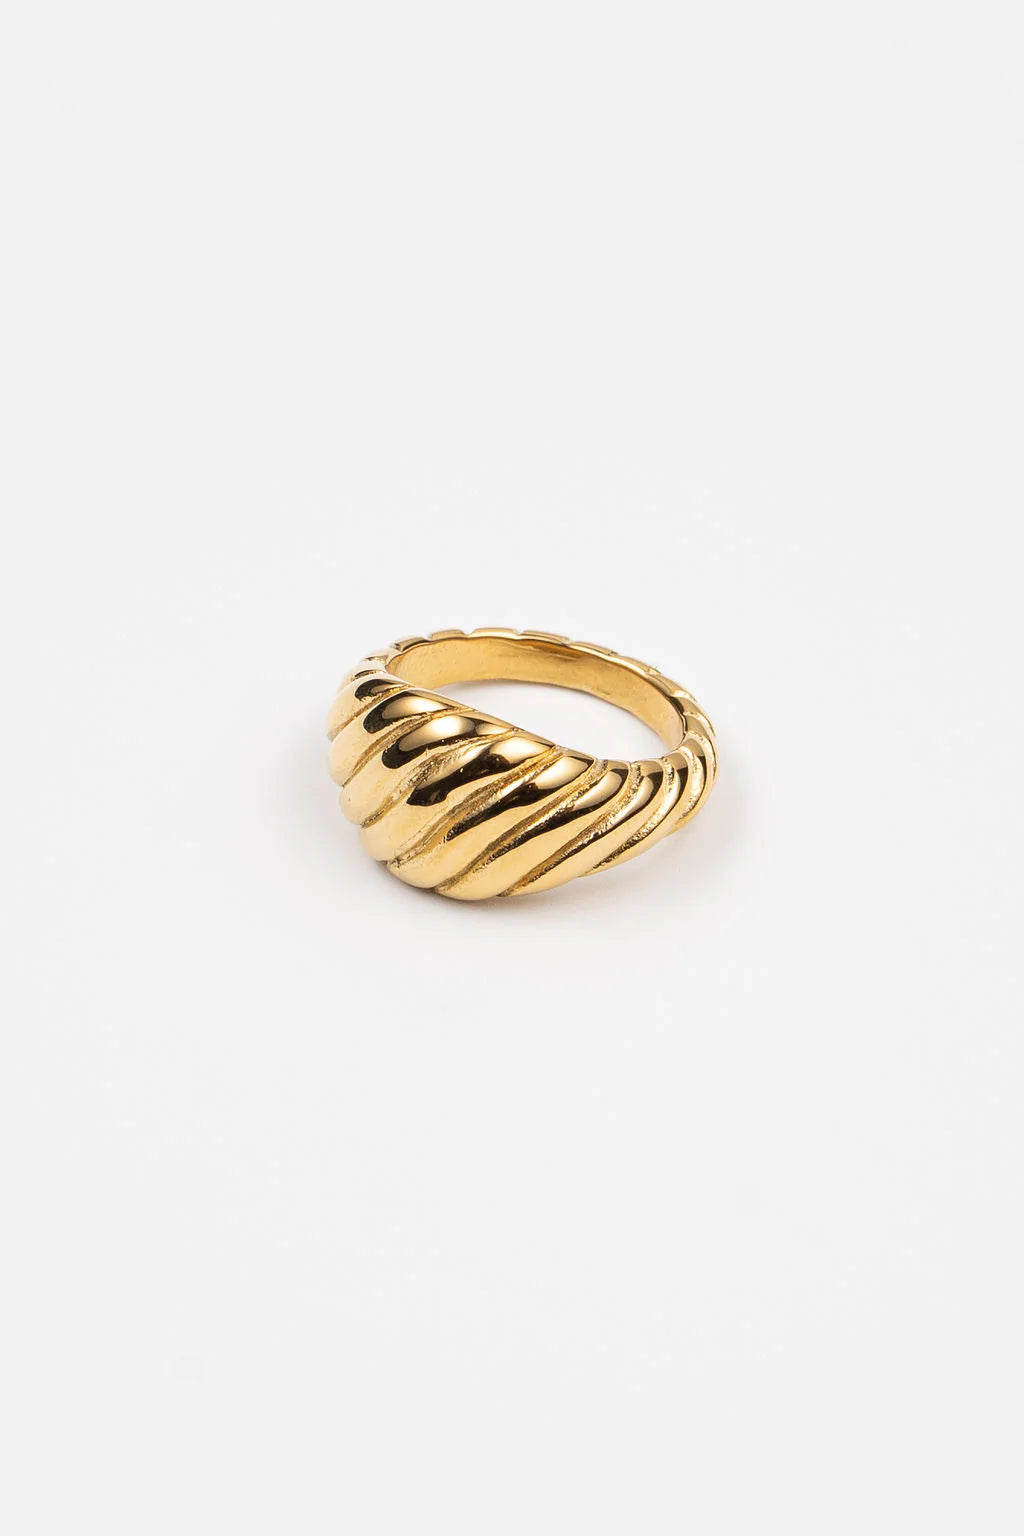 brenda grands jewelry, chunky twisted ring, gold, womens rings, jewelry, handmade in Texas, ethical brand, curate